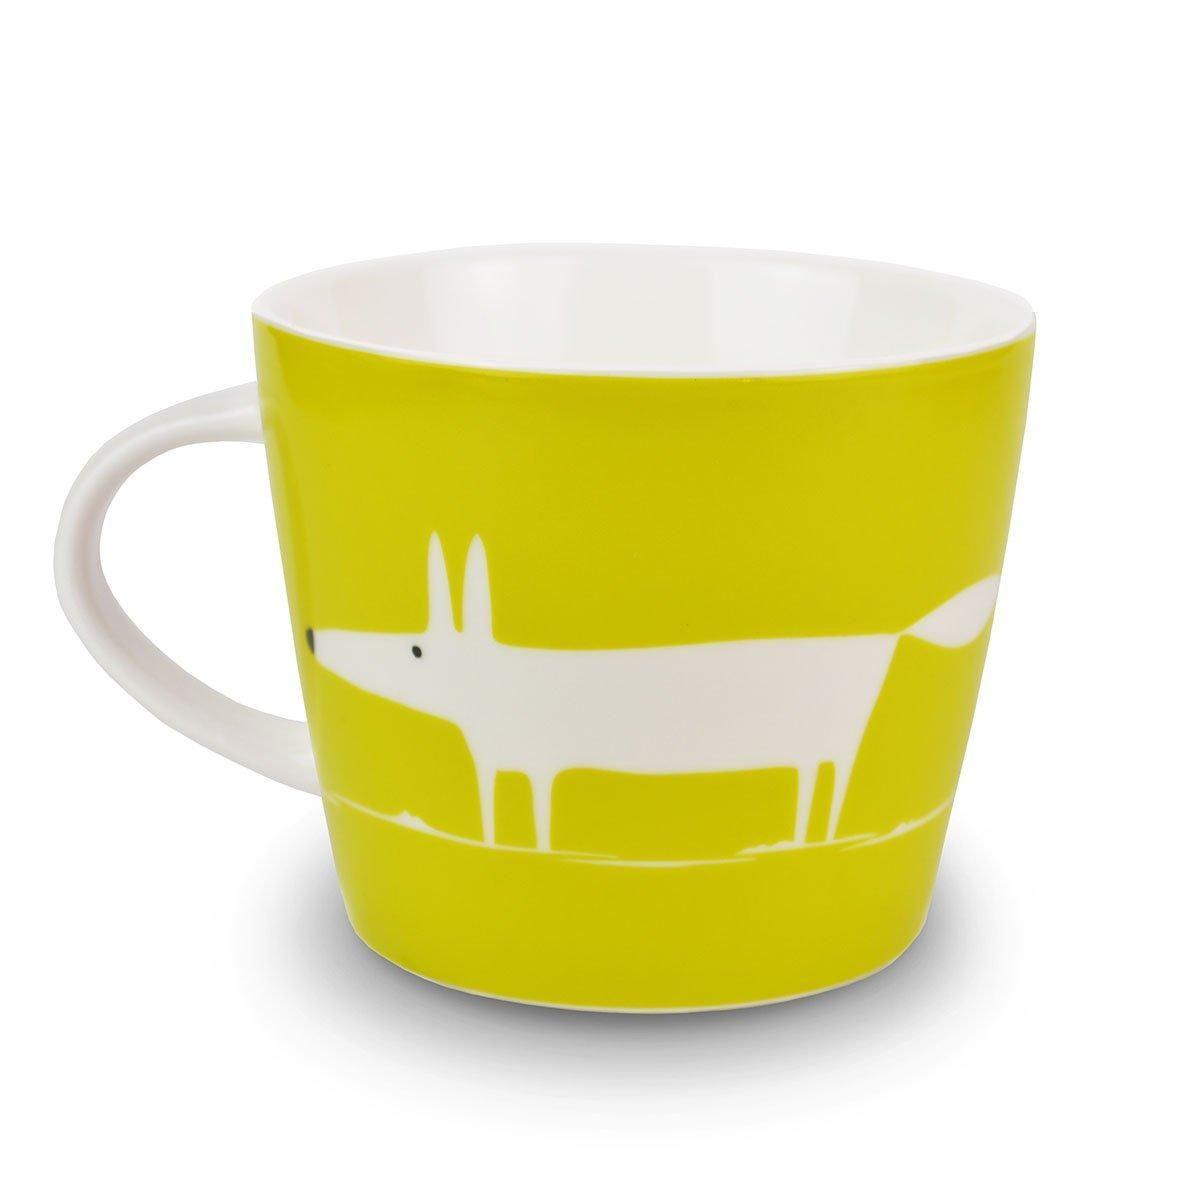  Mugs And Cups SC-0045 